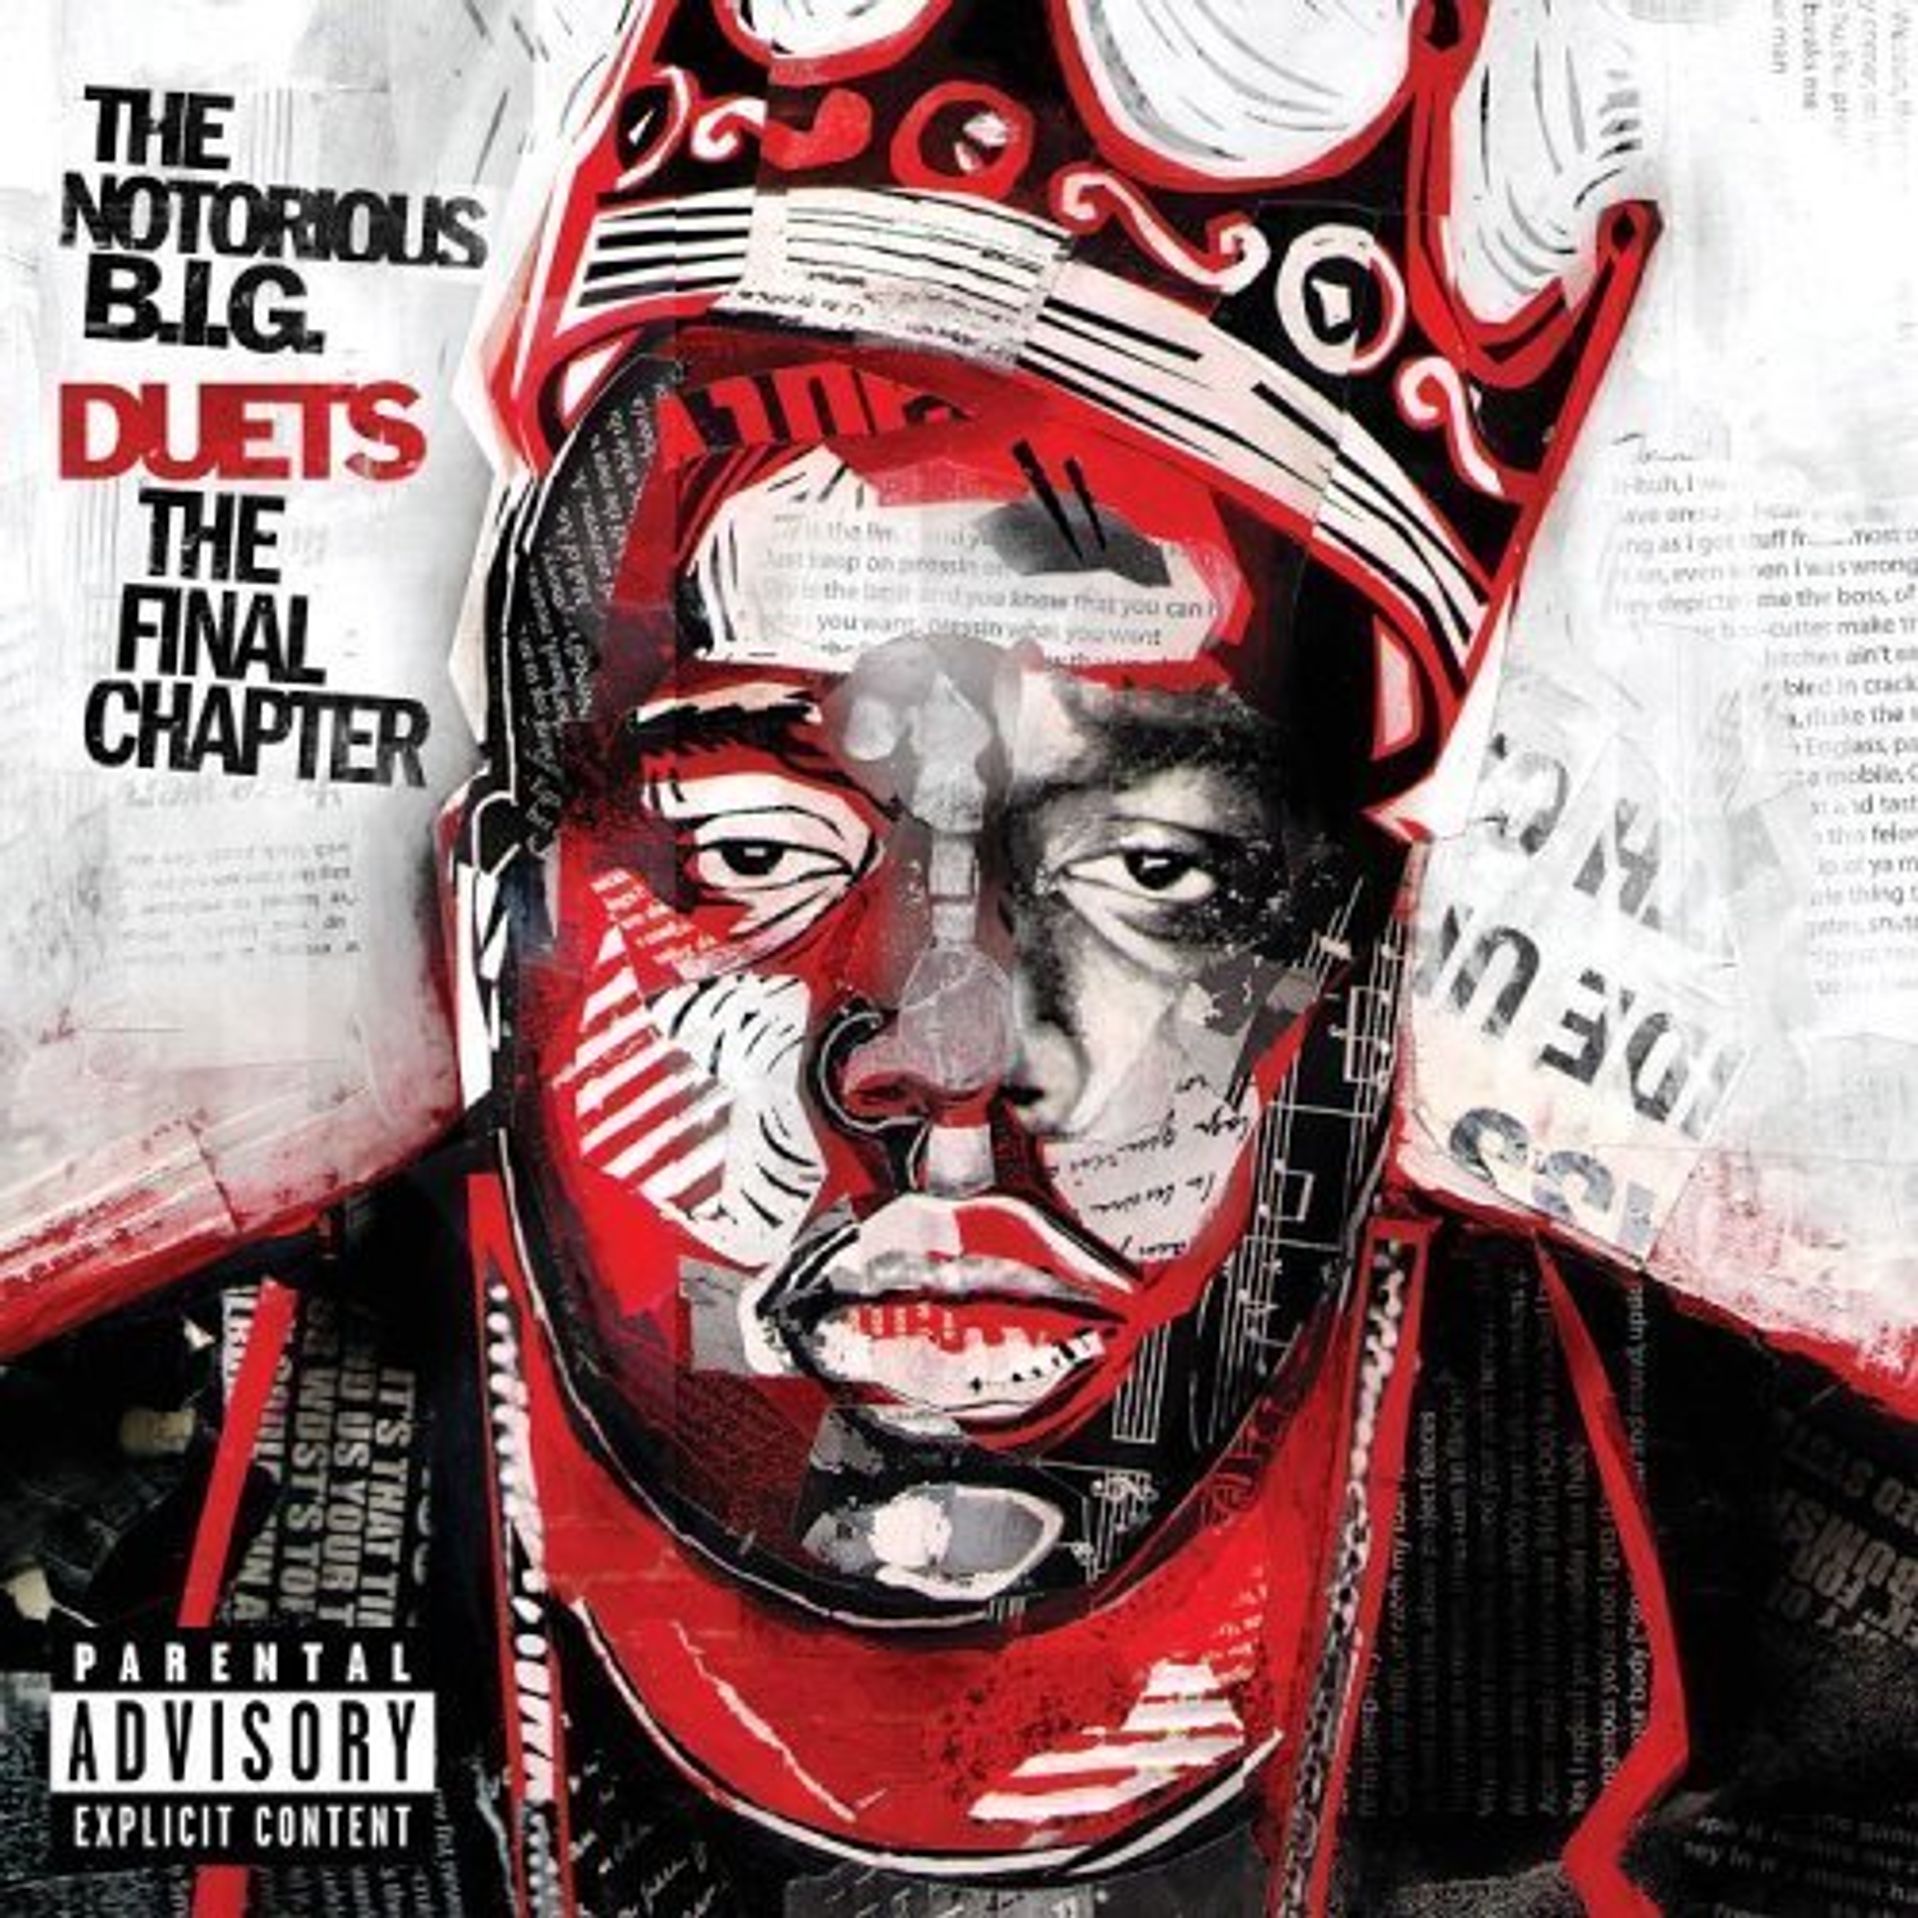 Album Title: Duets: The Final Chapter by: The Notorious BIG